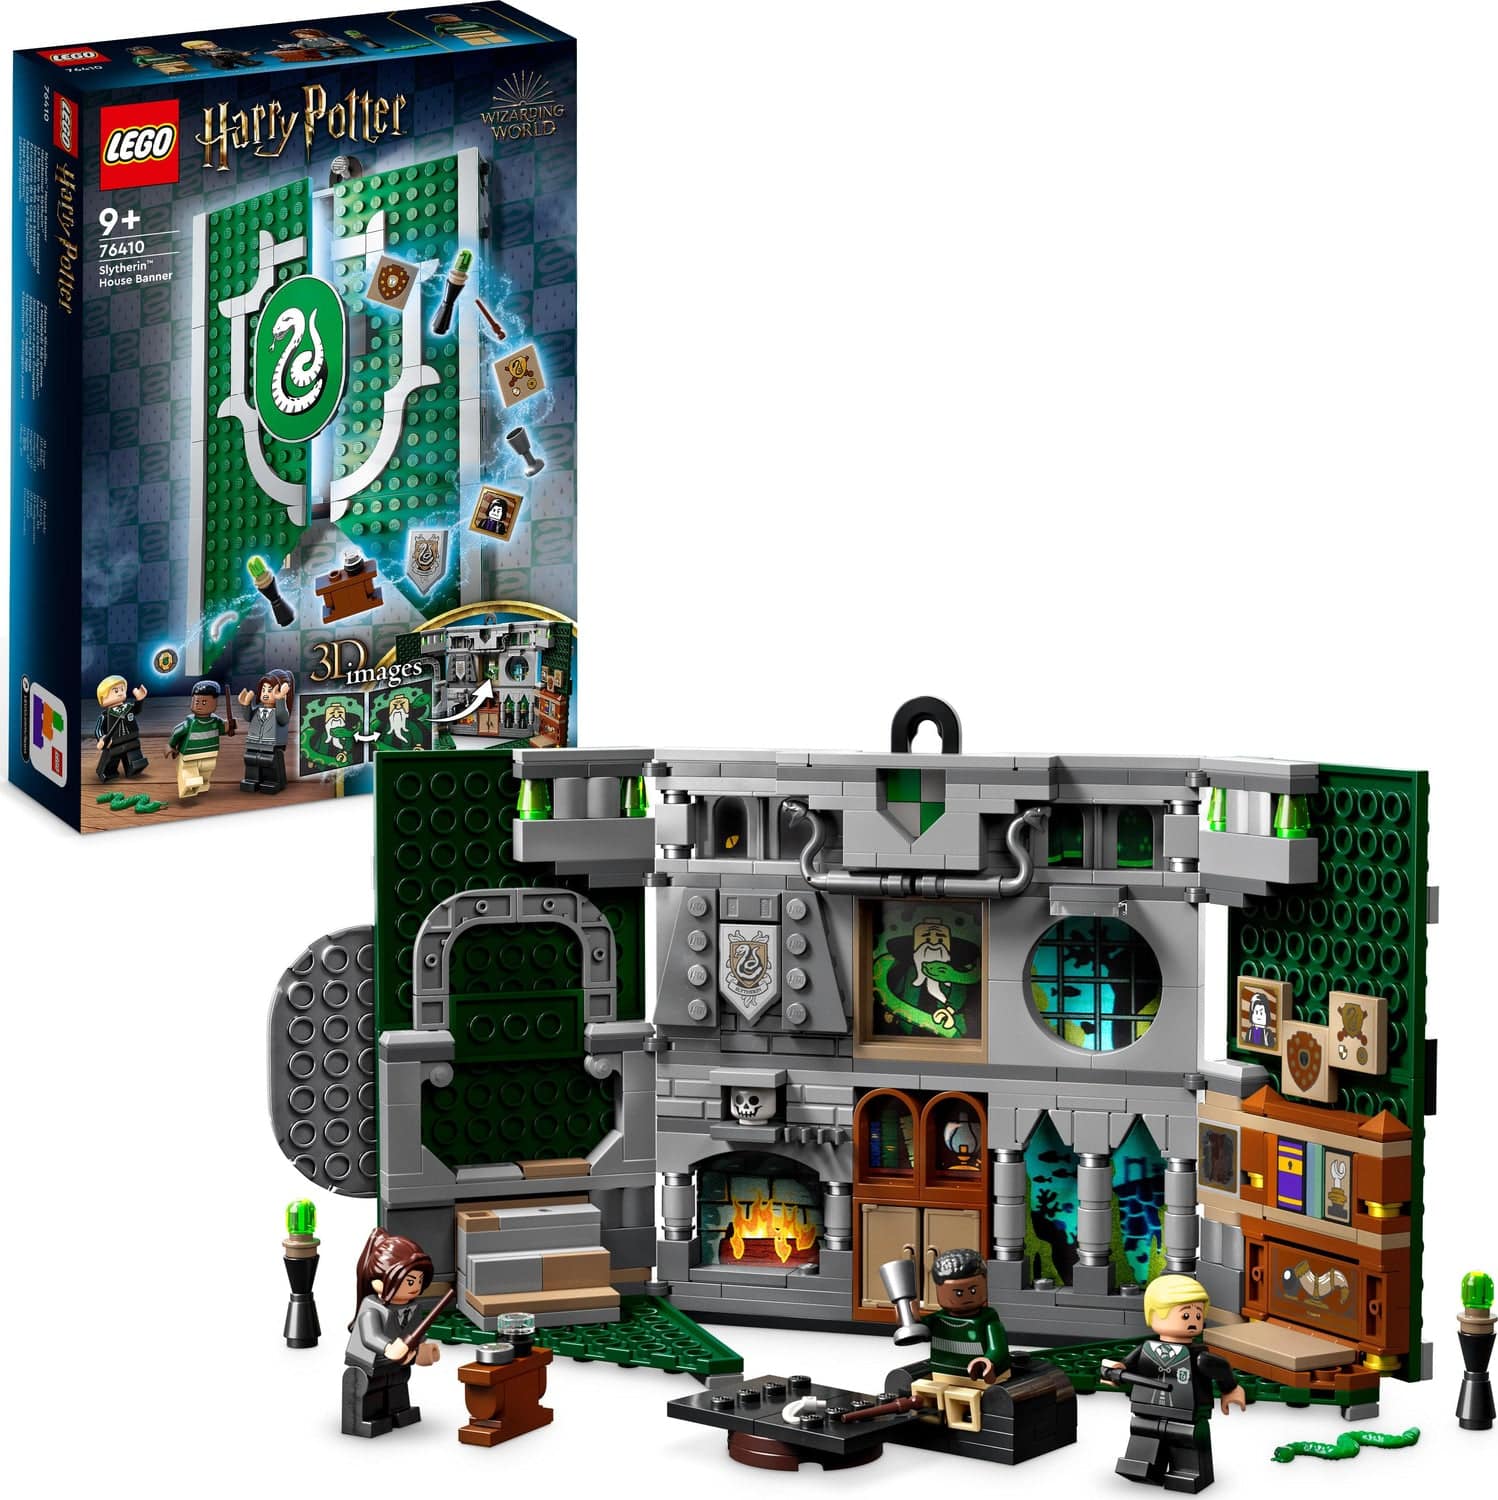 76410 Slytherin House Banner - A Child's Delight